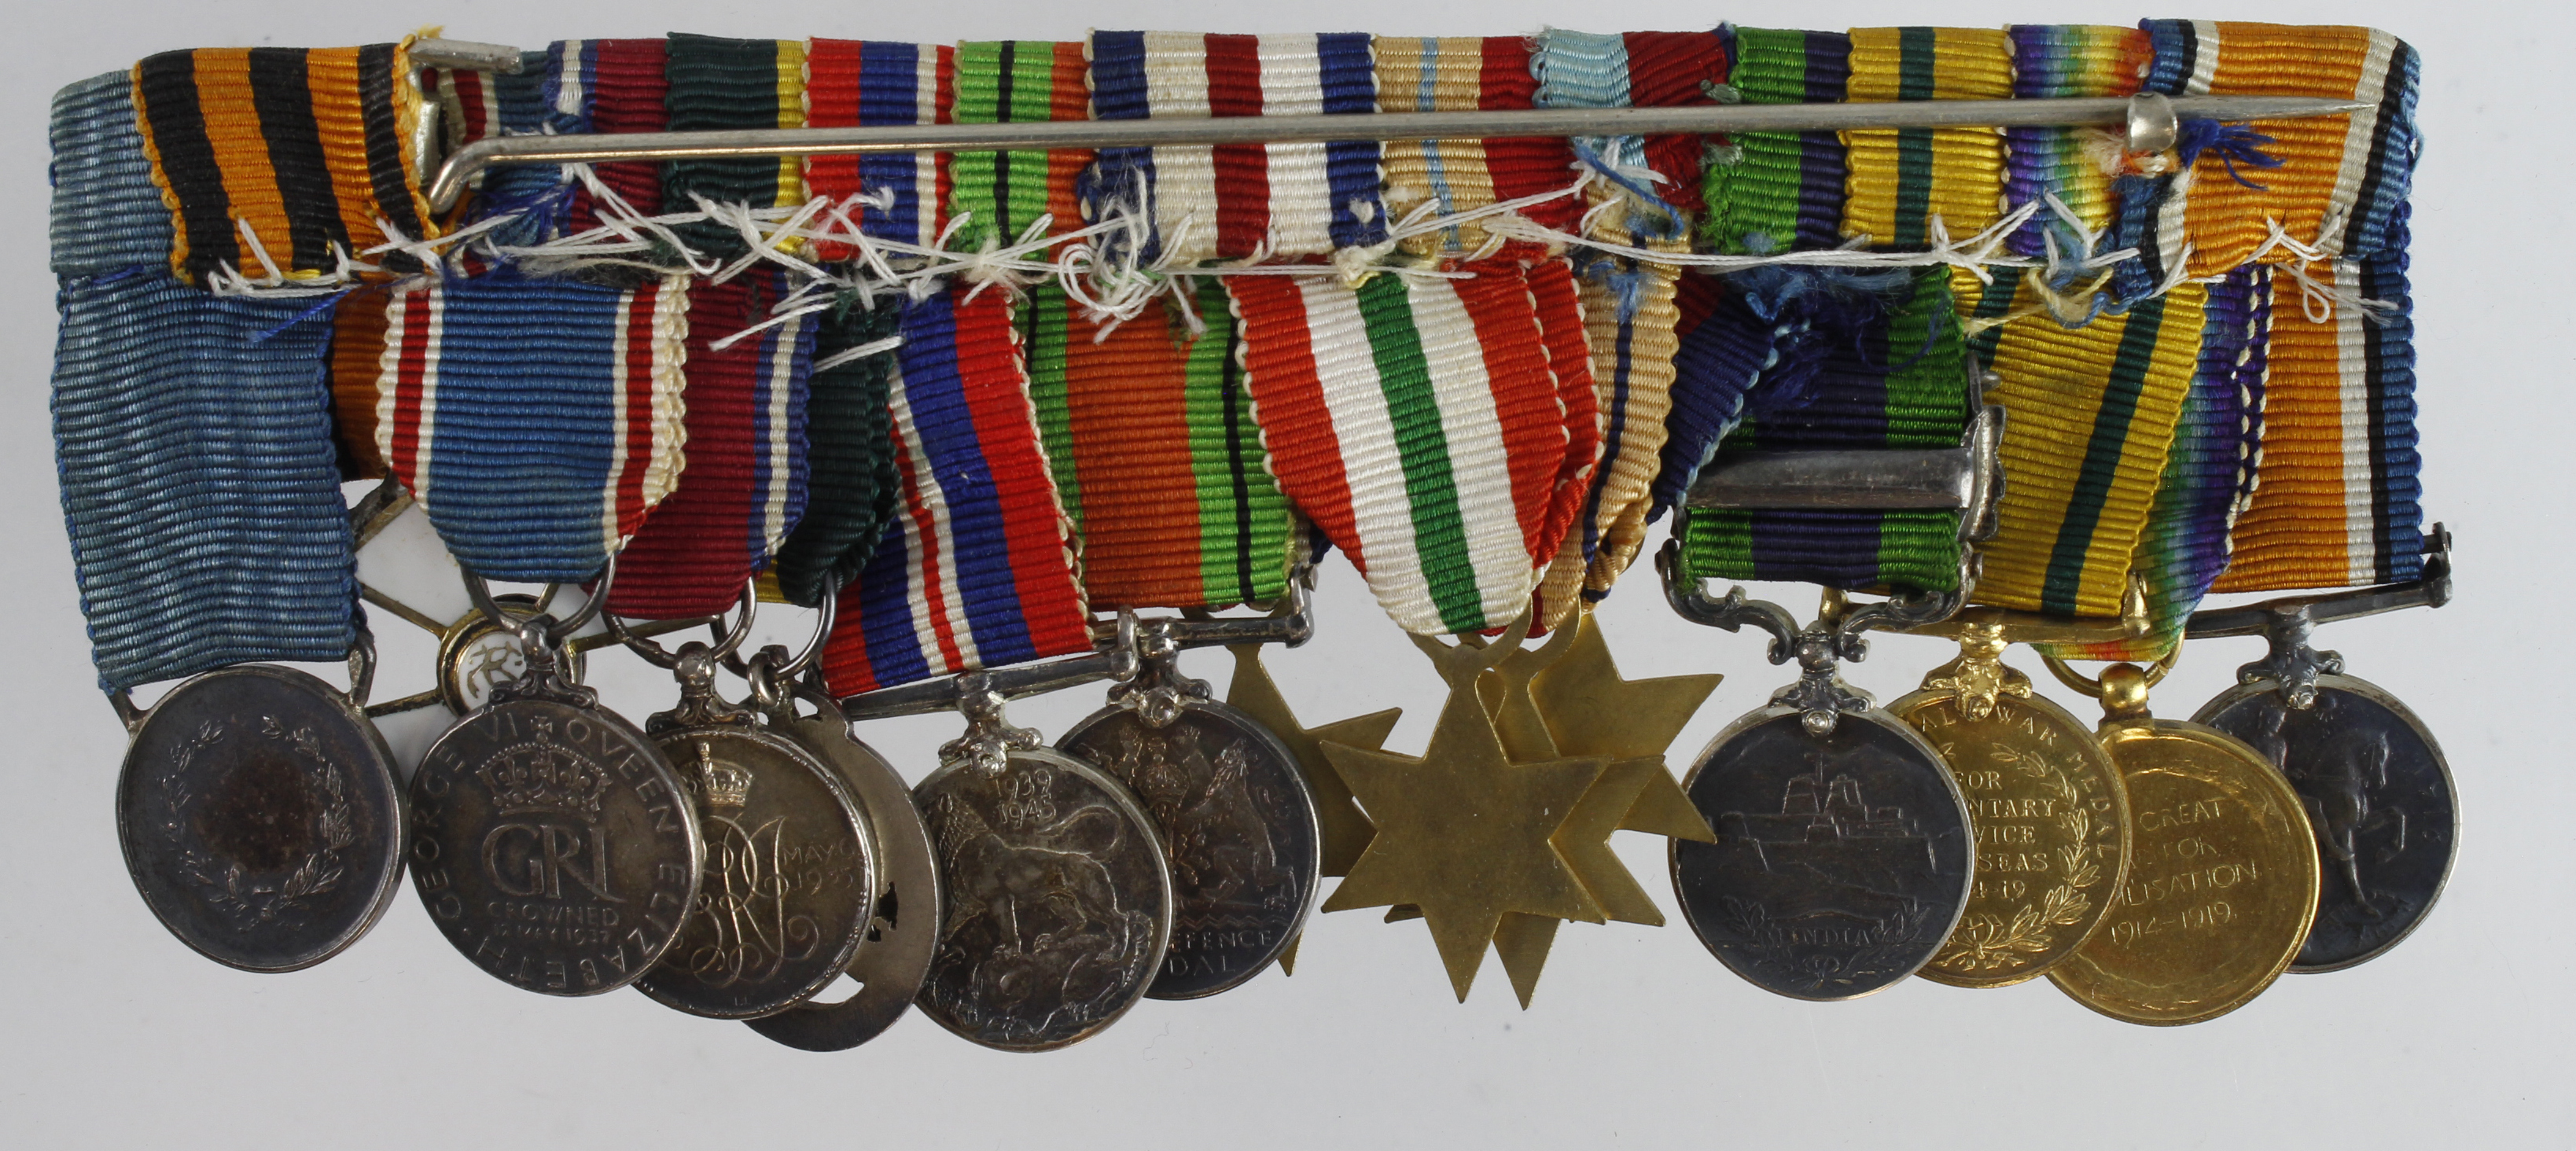 Minature Medal group mounted as worn - BWM & Victory Medal, Territorial War Medal, IGS GV with - Image 2 of 2